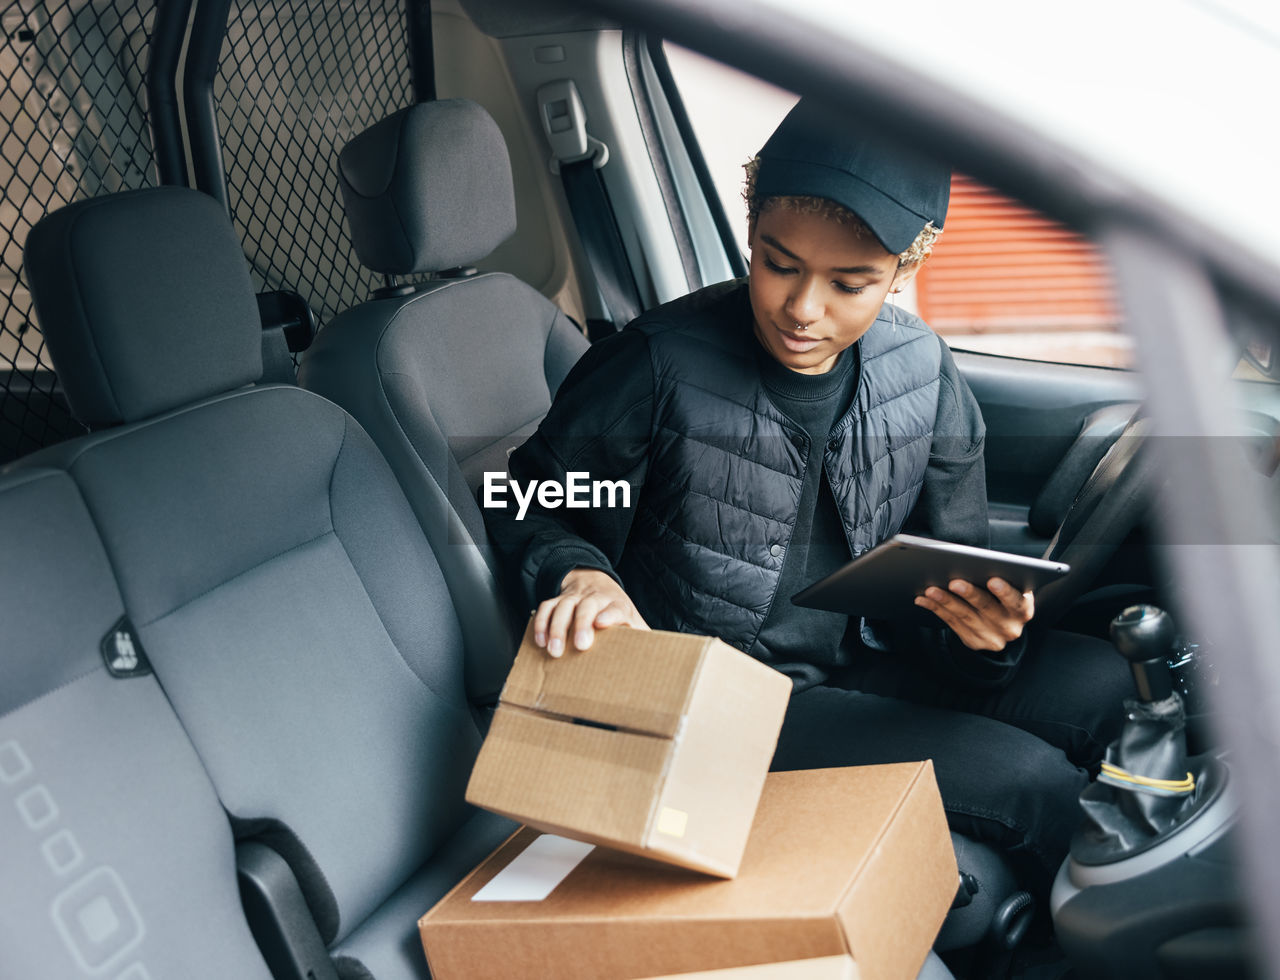 Smiling delivery person with parcel sitting in car